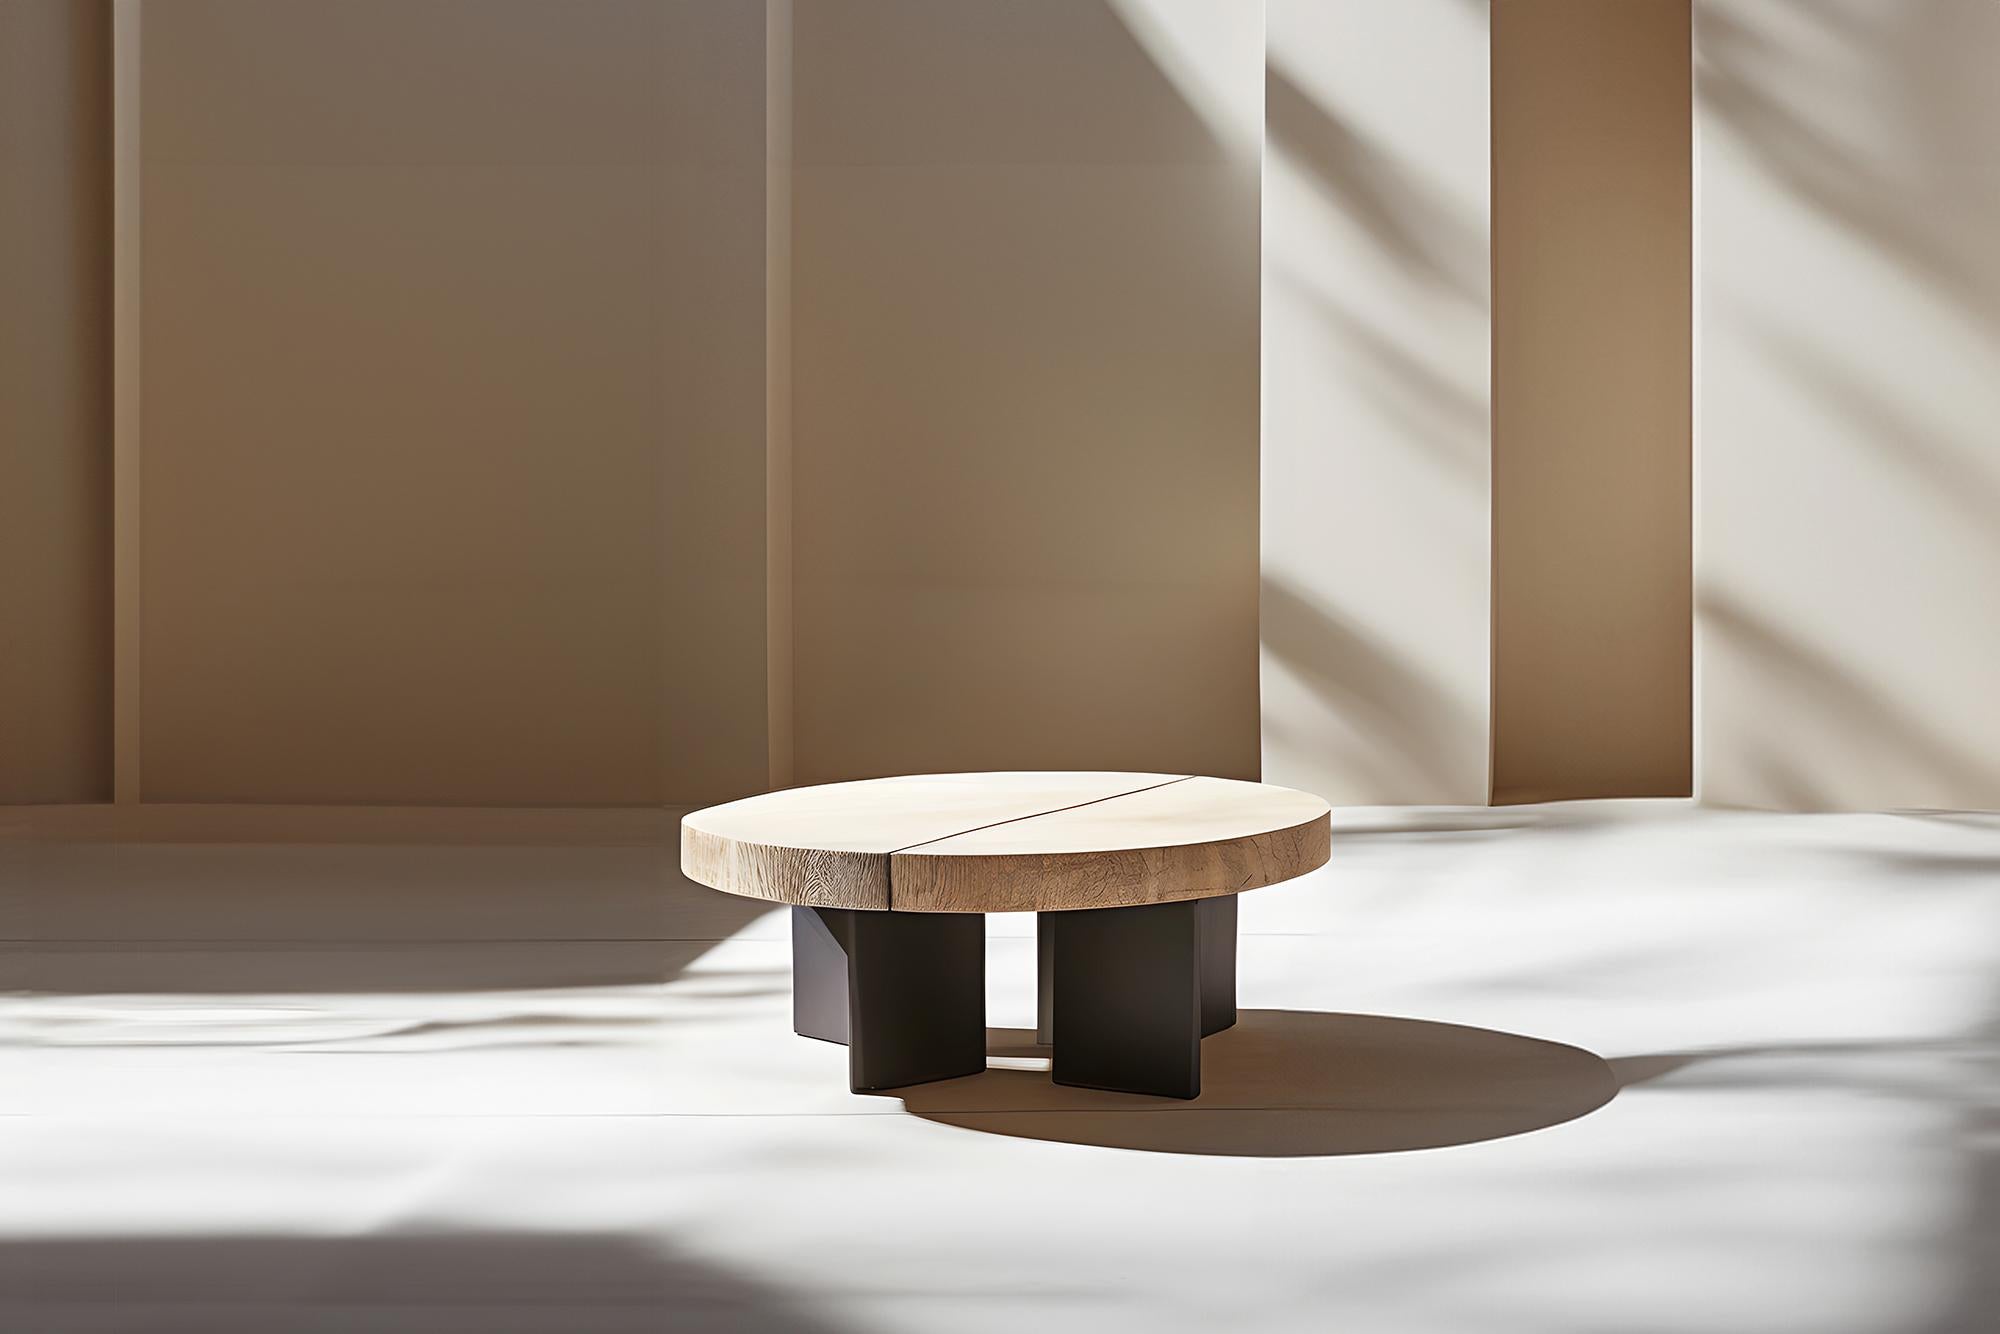 Round Top Fundamenta Table 53 Abstract Shapes, Oak Elegance by NONO



Sculptural coffee table made of solid wood with a natural water-based or black tinted finish. Due to the nature of the production process, each piece may vary in grain, texture,